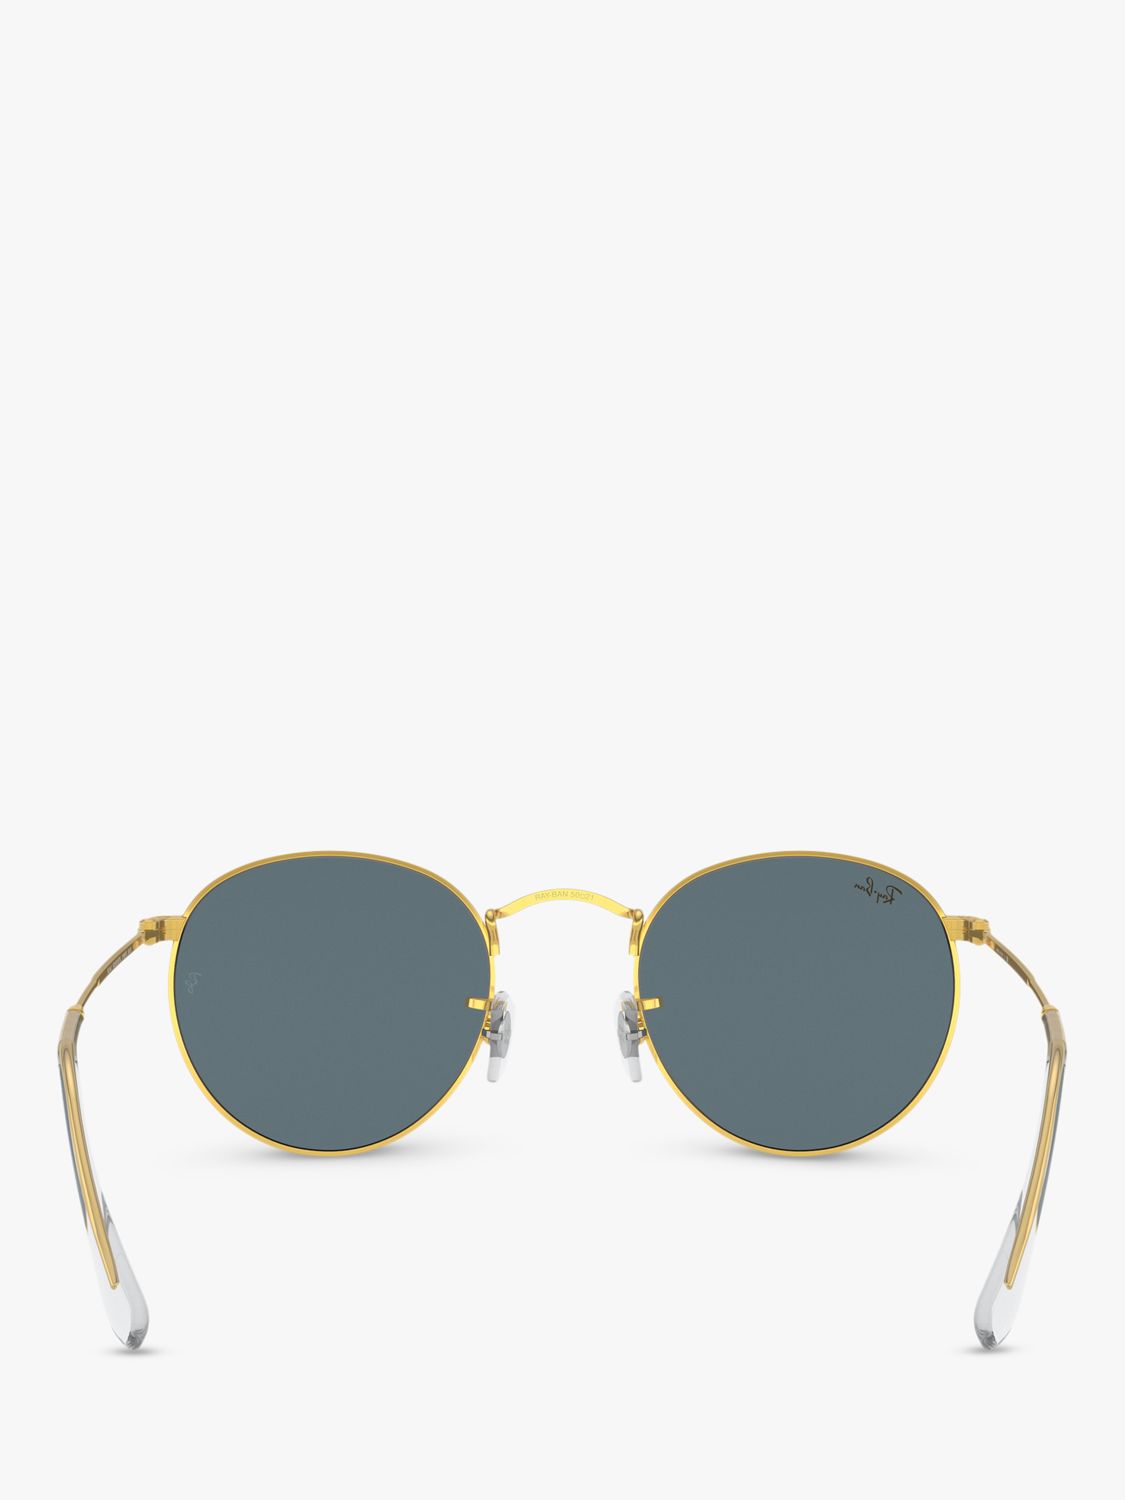 Buy Ray-Ban RB3447 Men's Round Metal Sunglasses, Legend Gold/Classic Blue Online at johnlewis.com